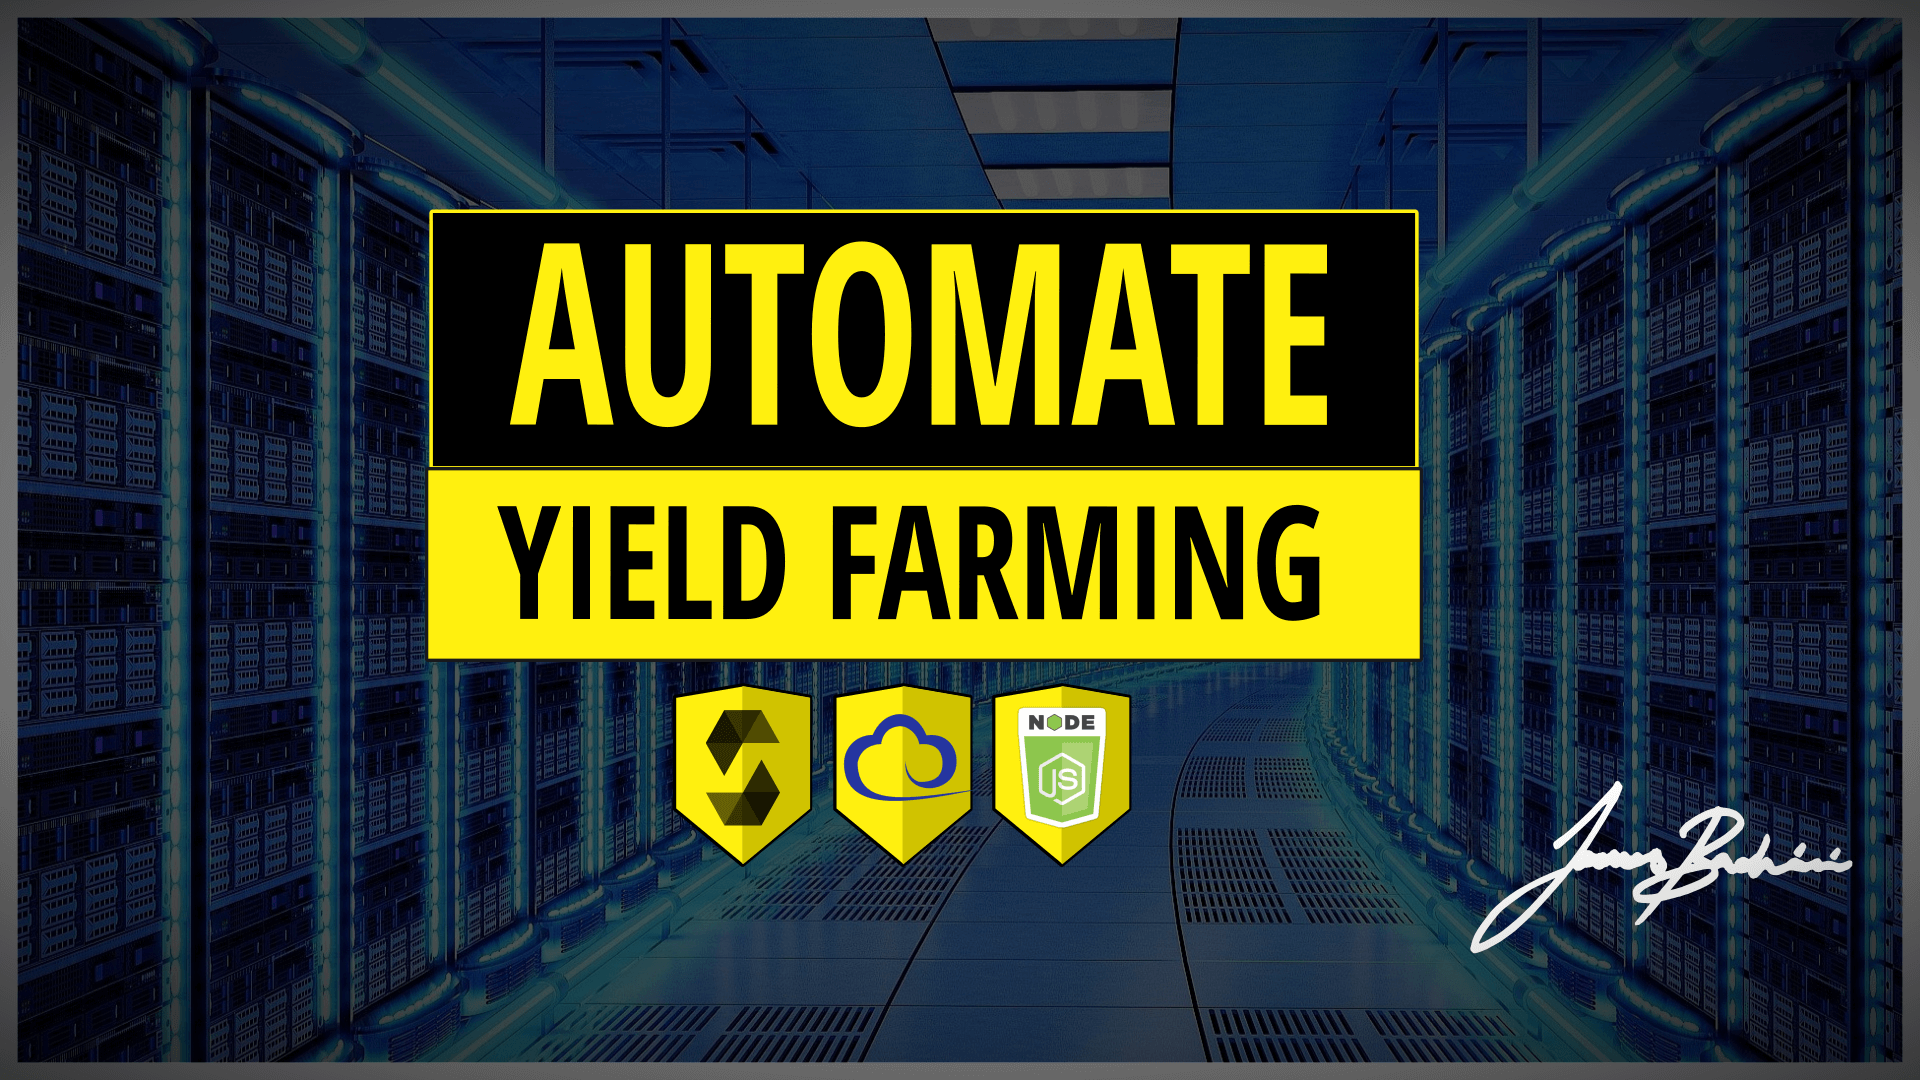 How To Automate Yield Farming | Harvesting Rewards With A Quick & Dirty Script